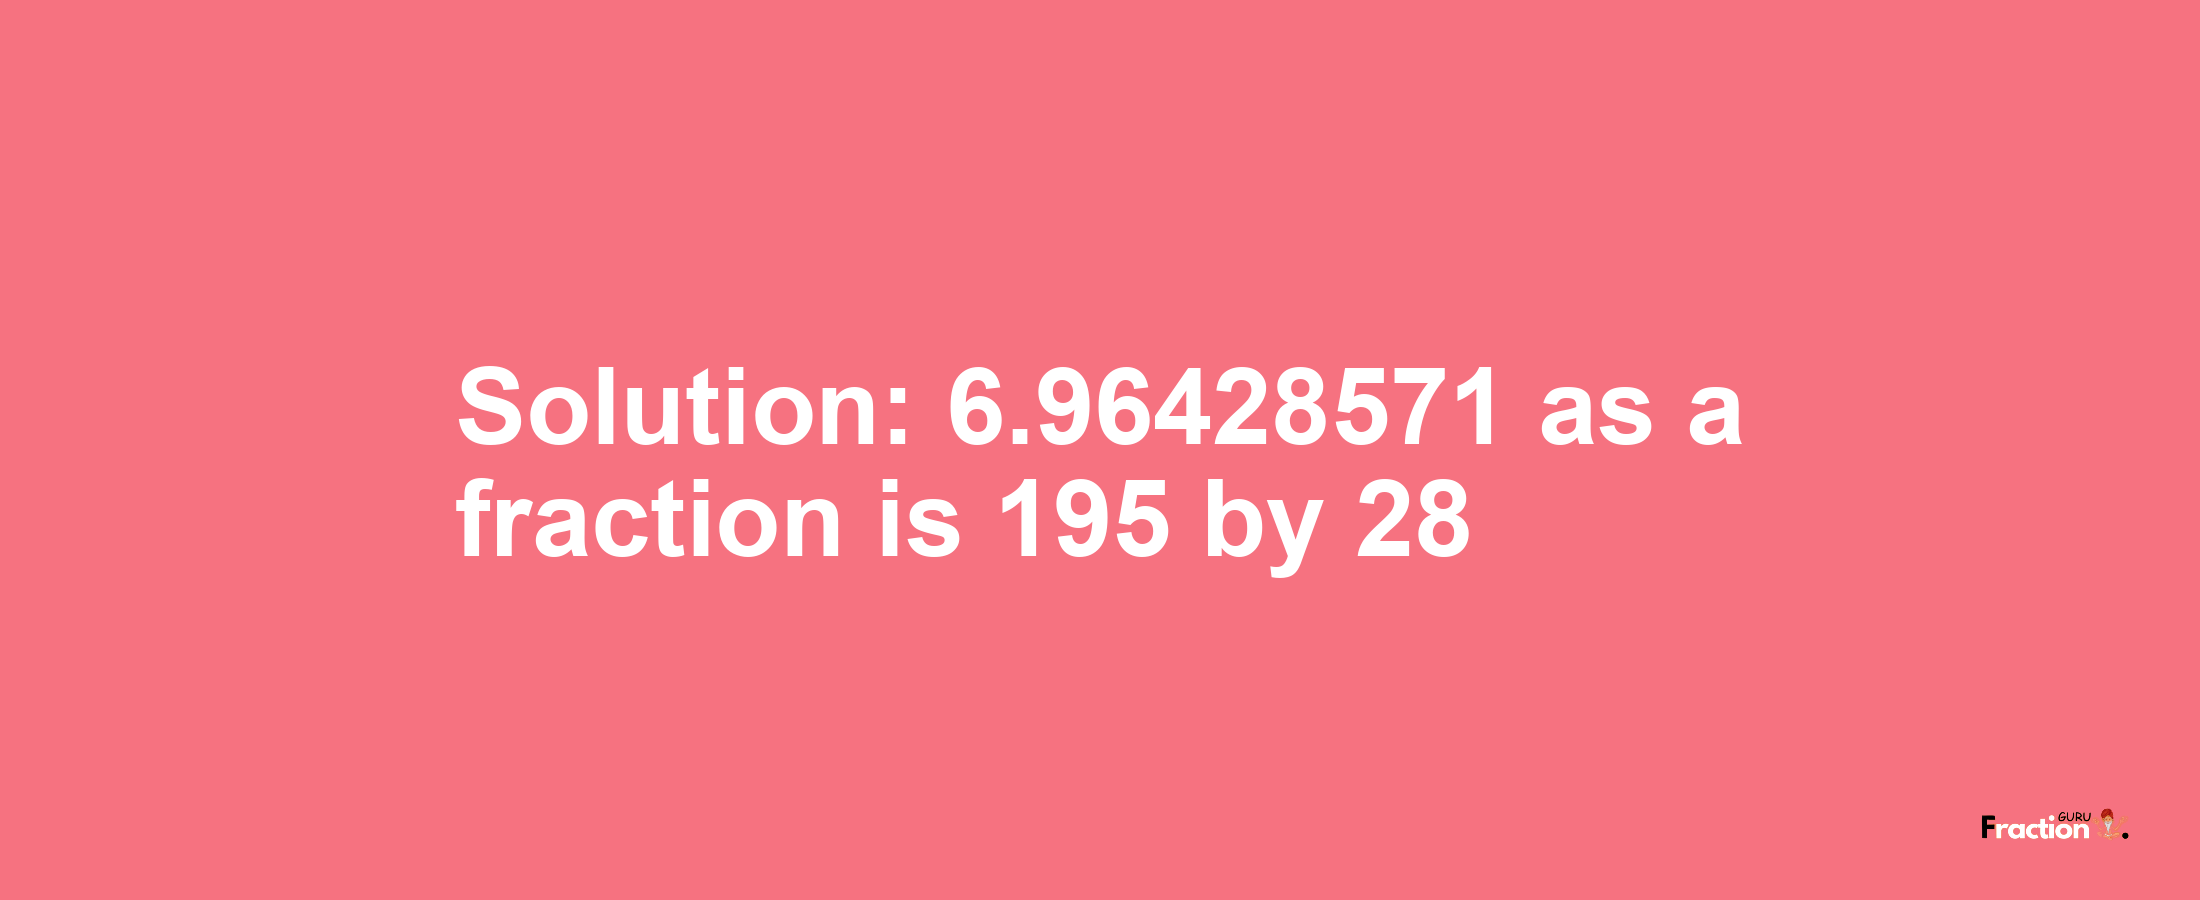 Solution:6.96428571 as a fraction is 195/28